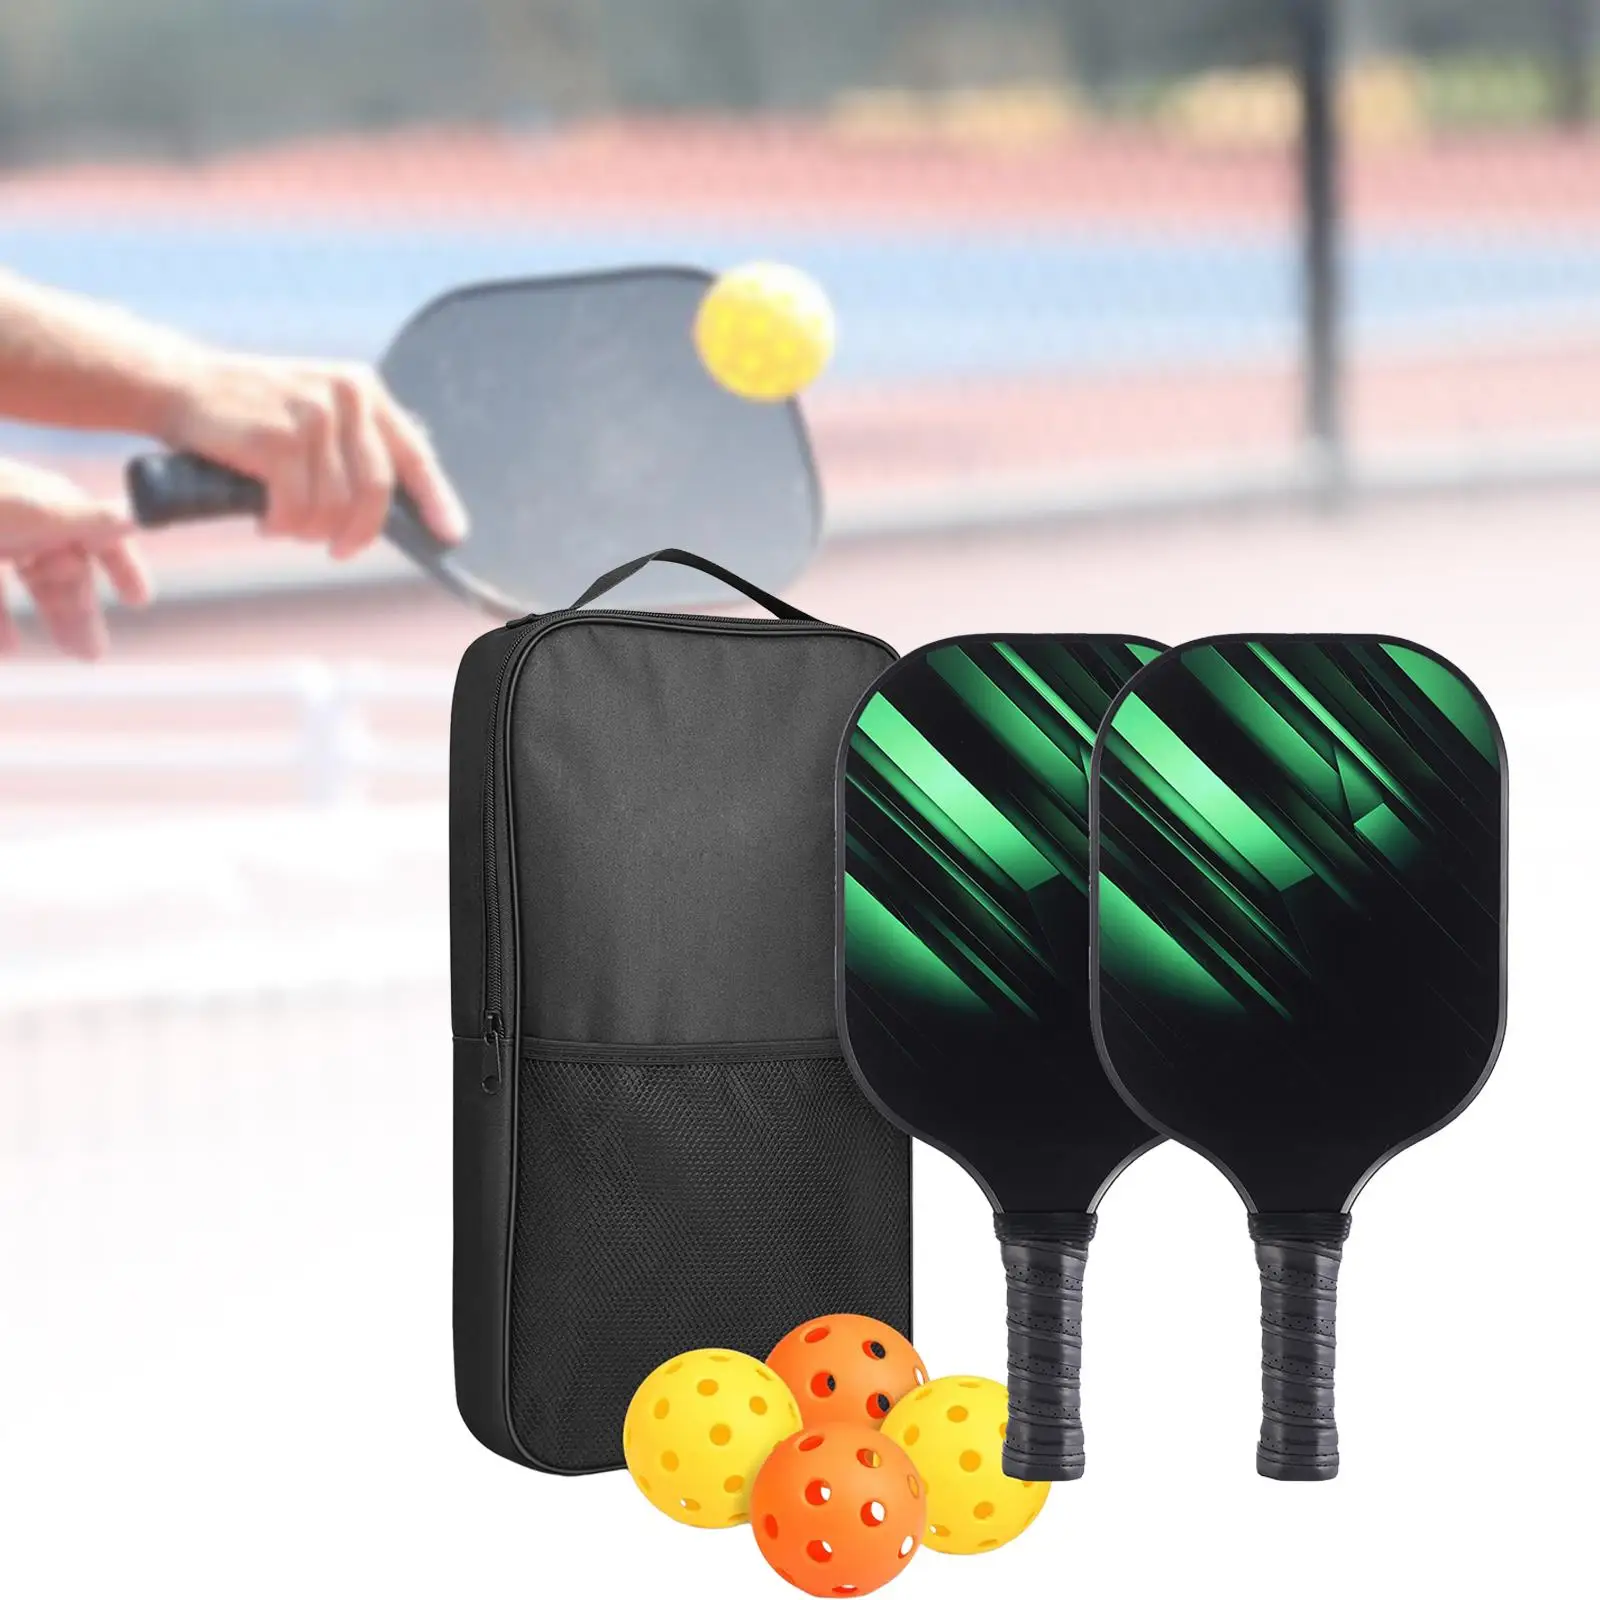 

Pickleball Racket Comfortable Grip Sports Goods Pickleball Set with Balls and Bag for Practice Indoor Training Outdoor Beginner